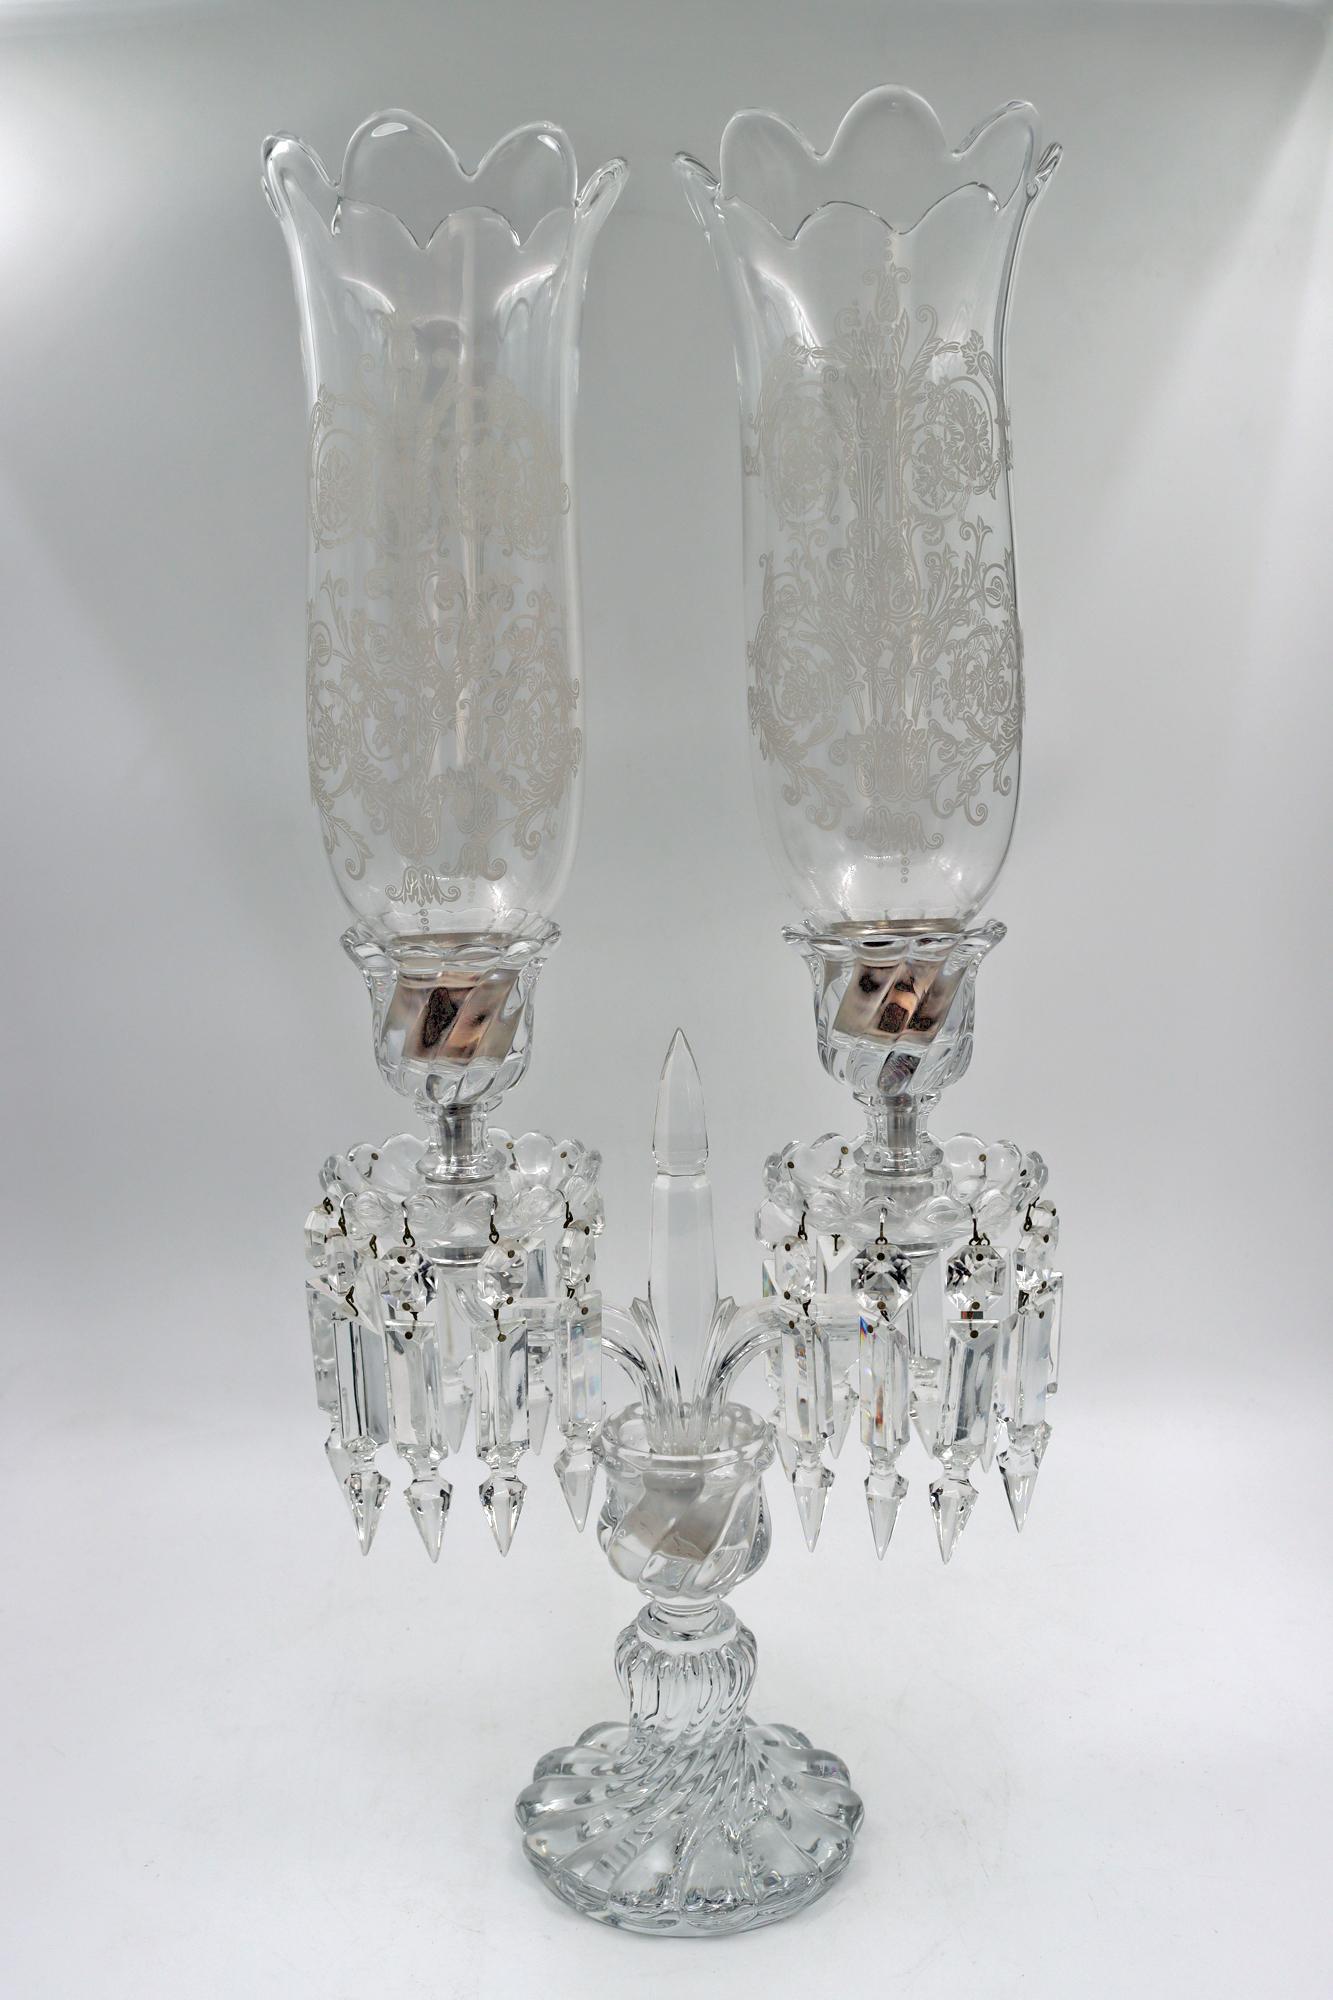 French Pair of Candelabras Signed Baccarat, 19th Century